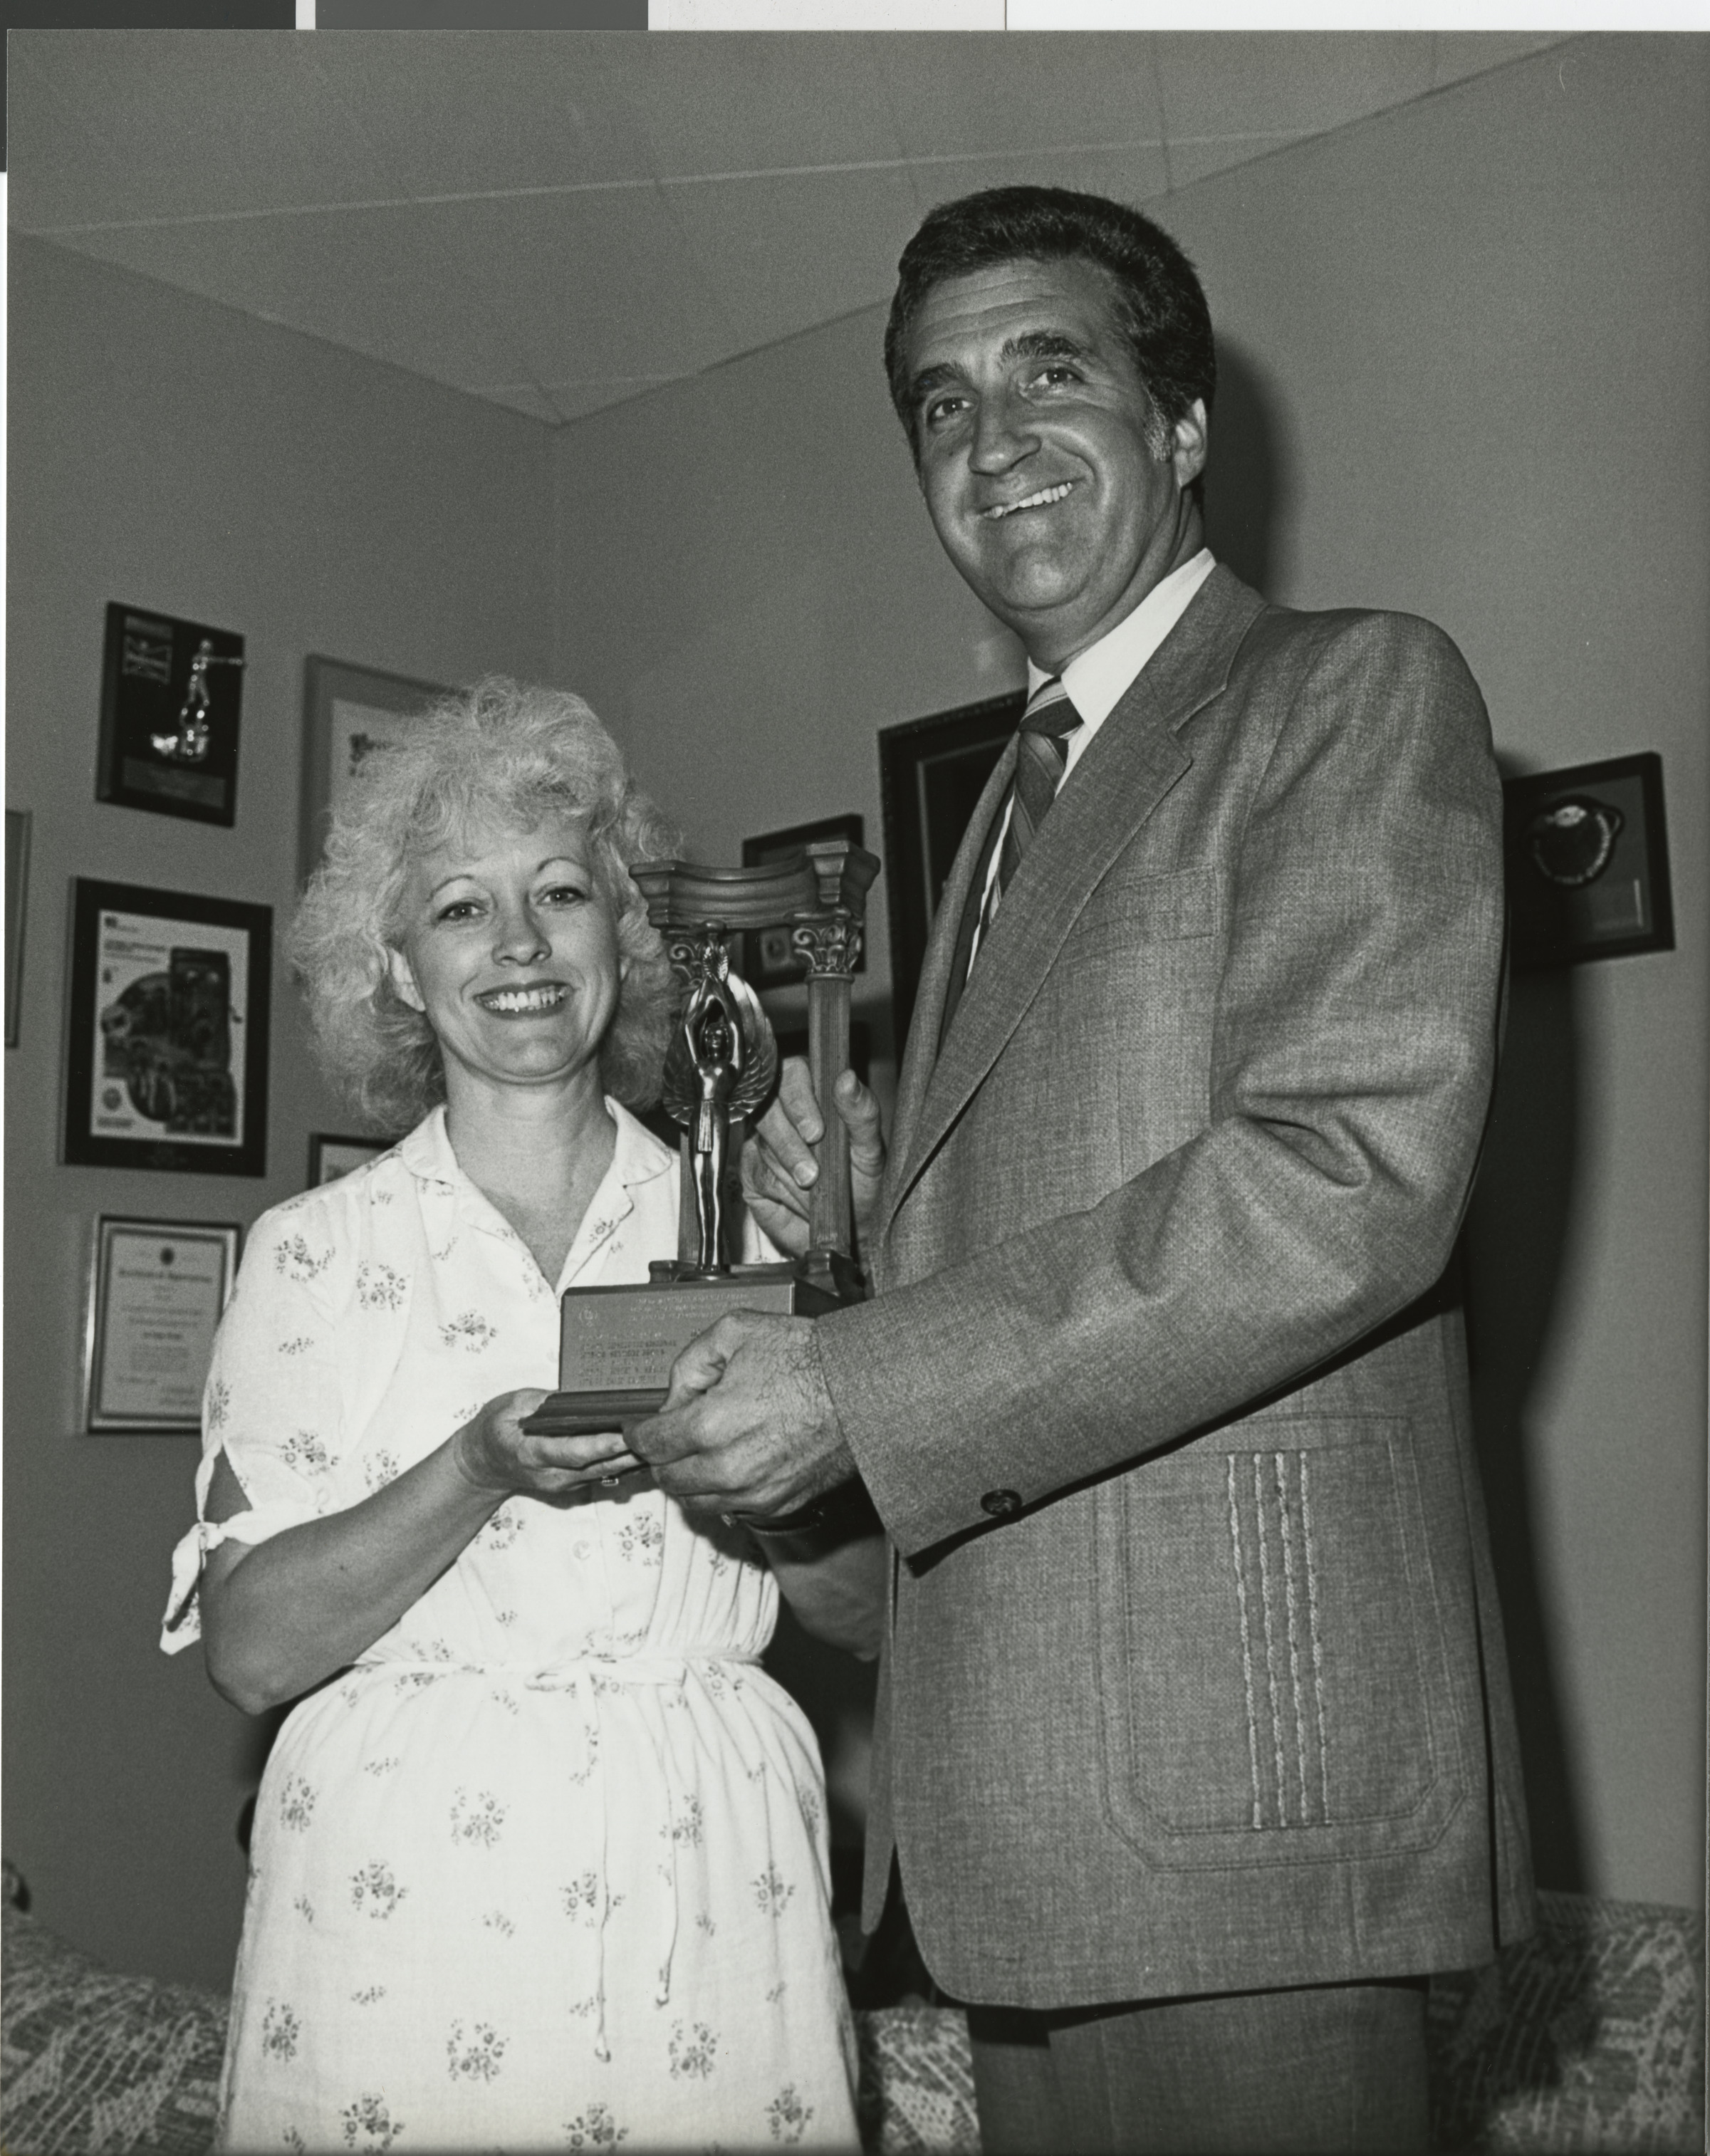 Photograph of Ron Lurie receiving the March of Dimes award from Mary Coon, Executive Director of March of Dimes, August 1982